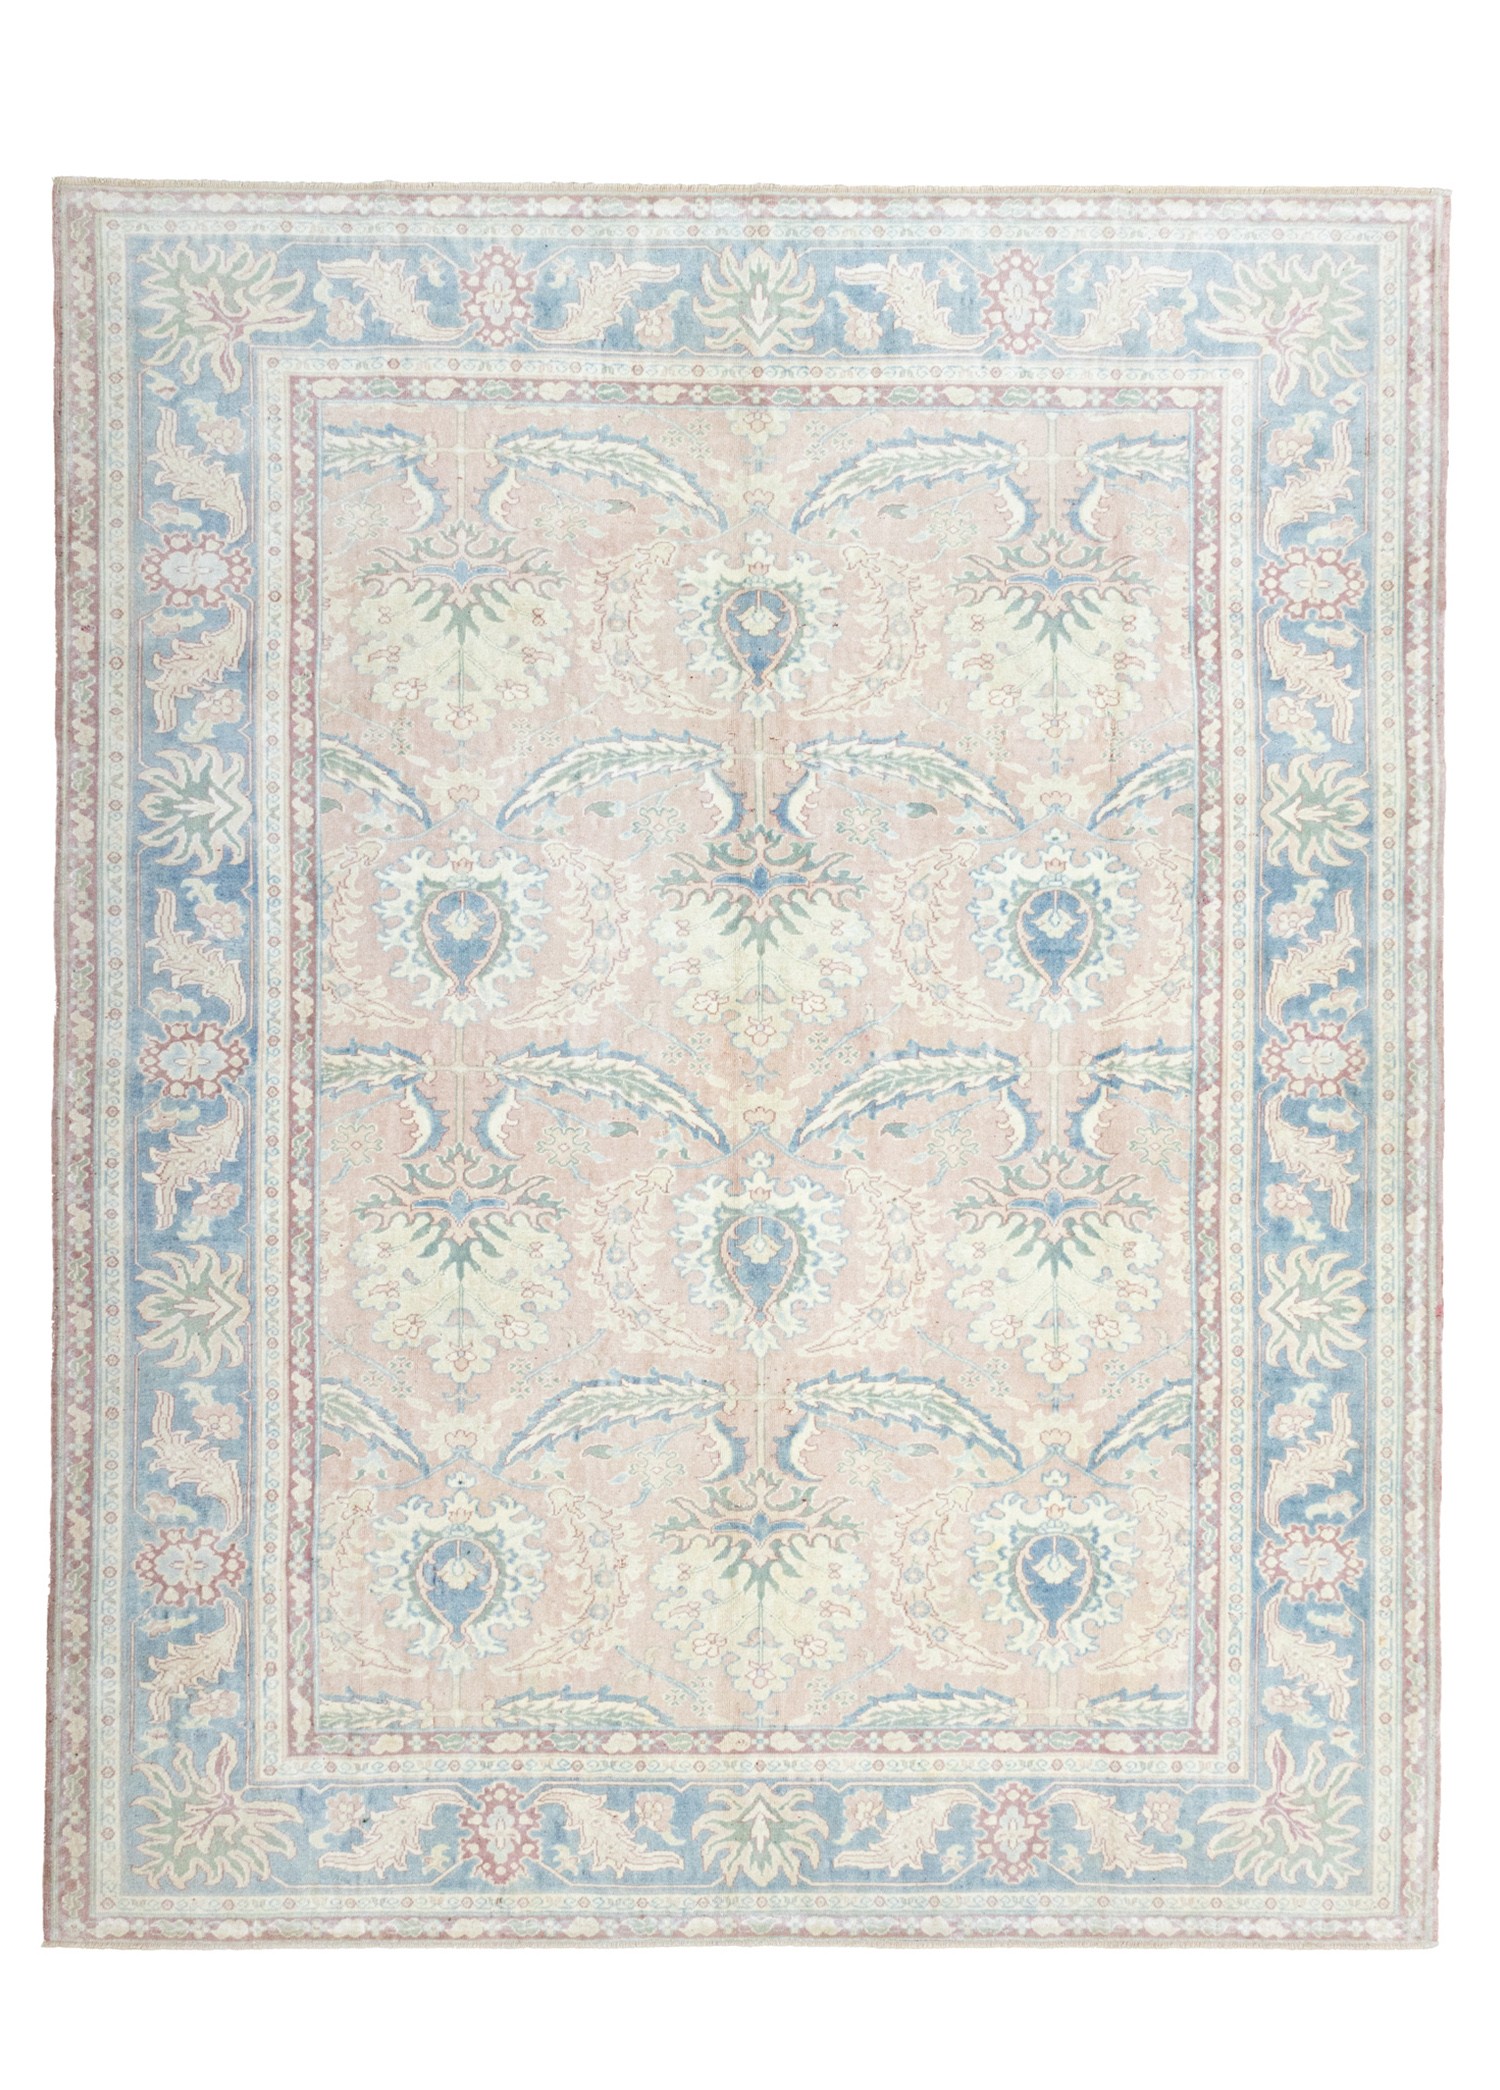 Adal Rustic Patterned Hand-Woven Wool Carpet 217x275 cm